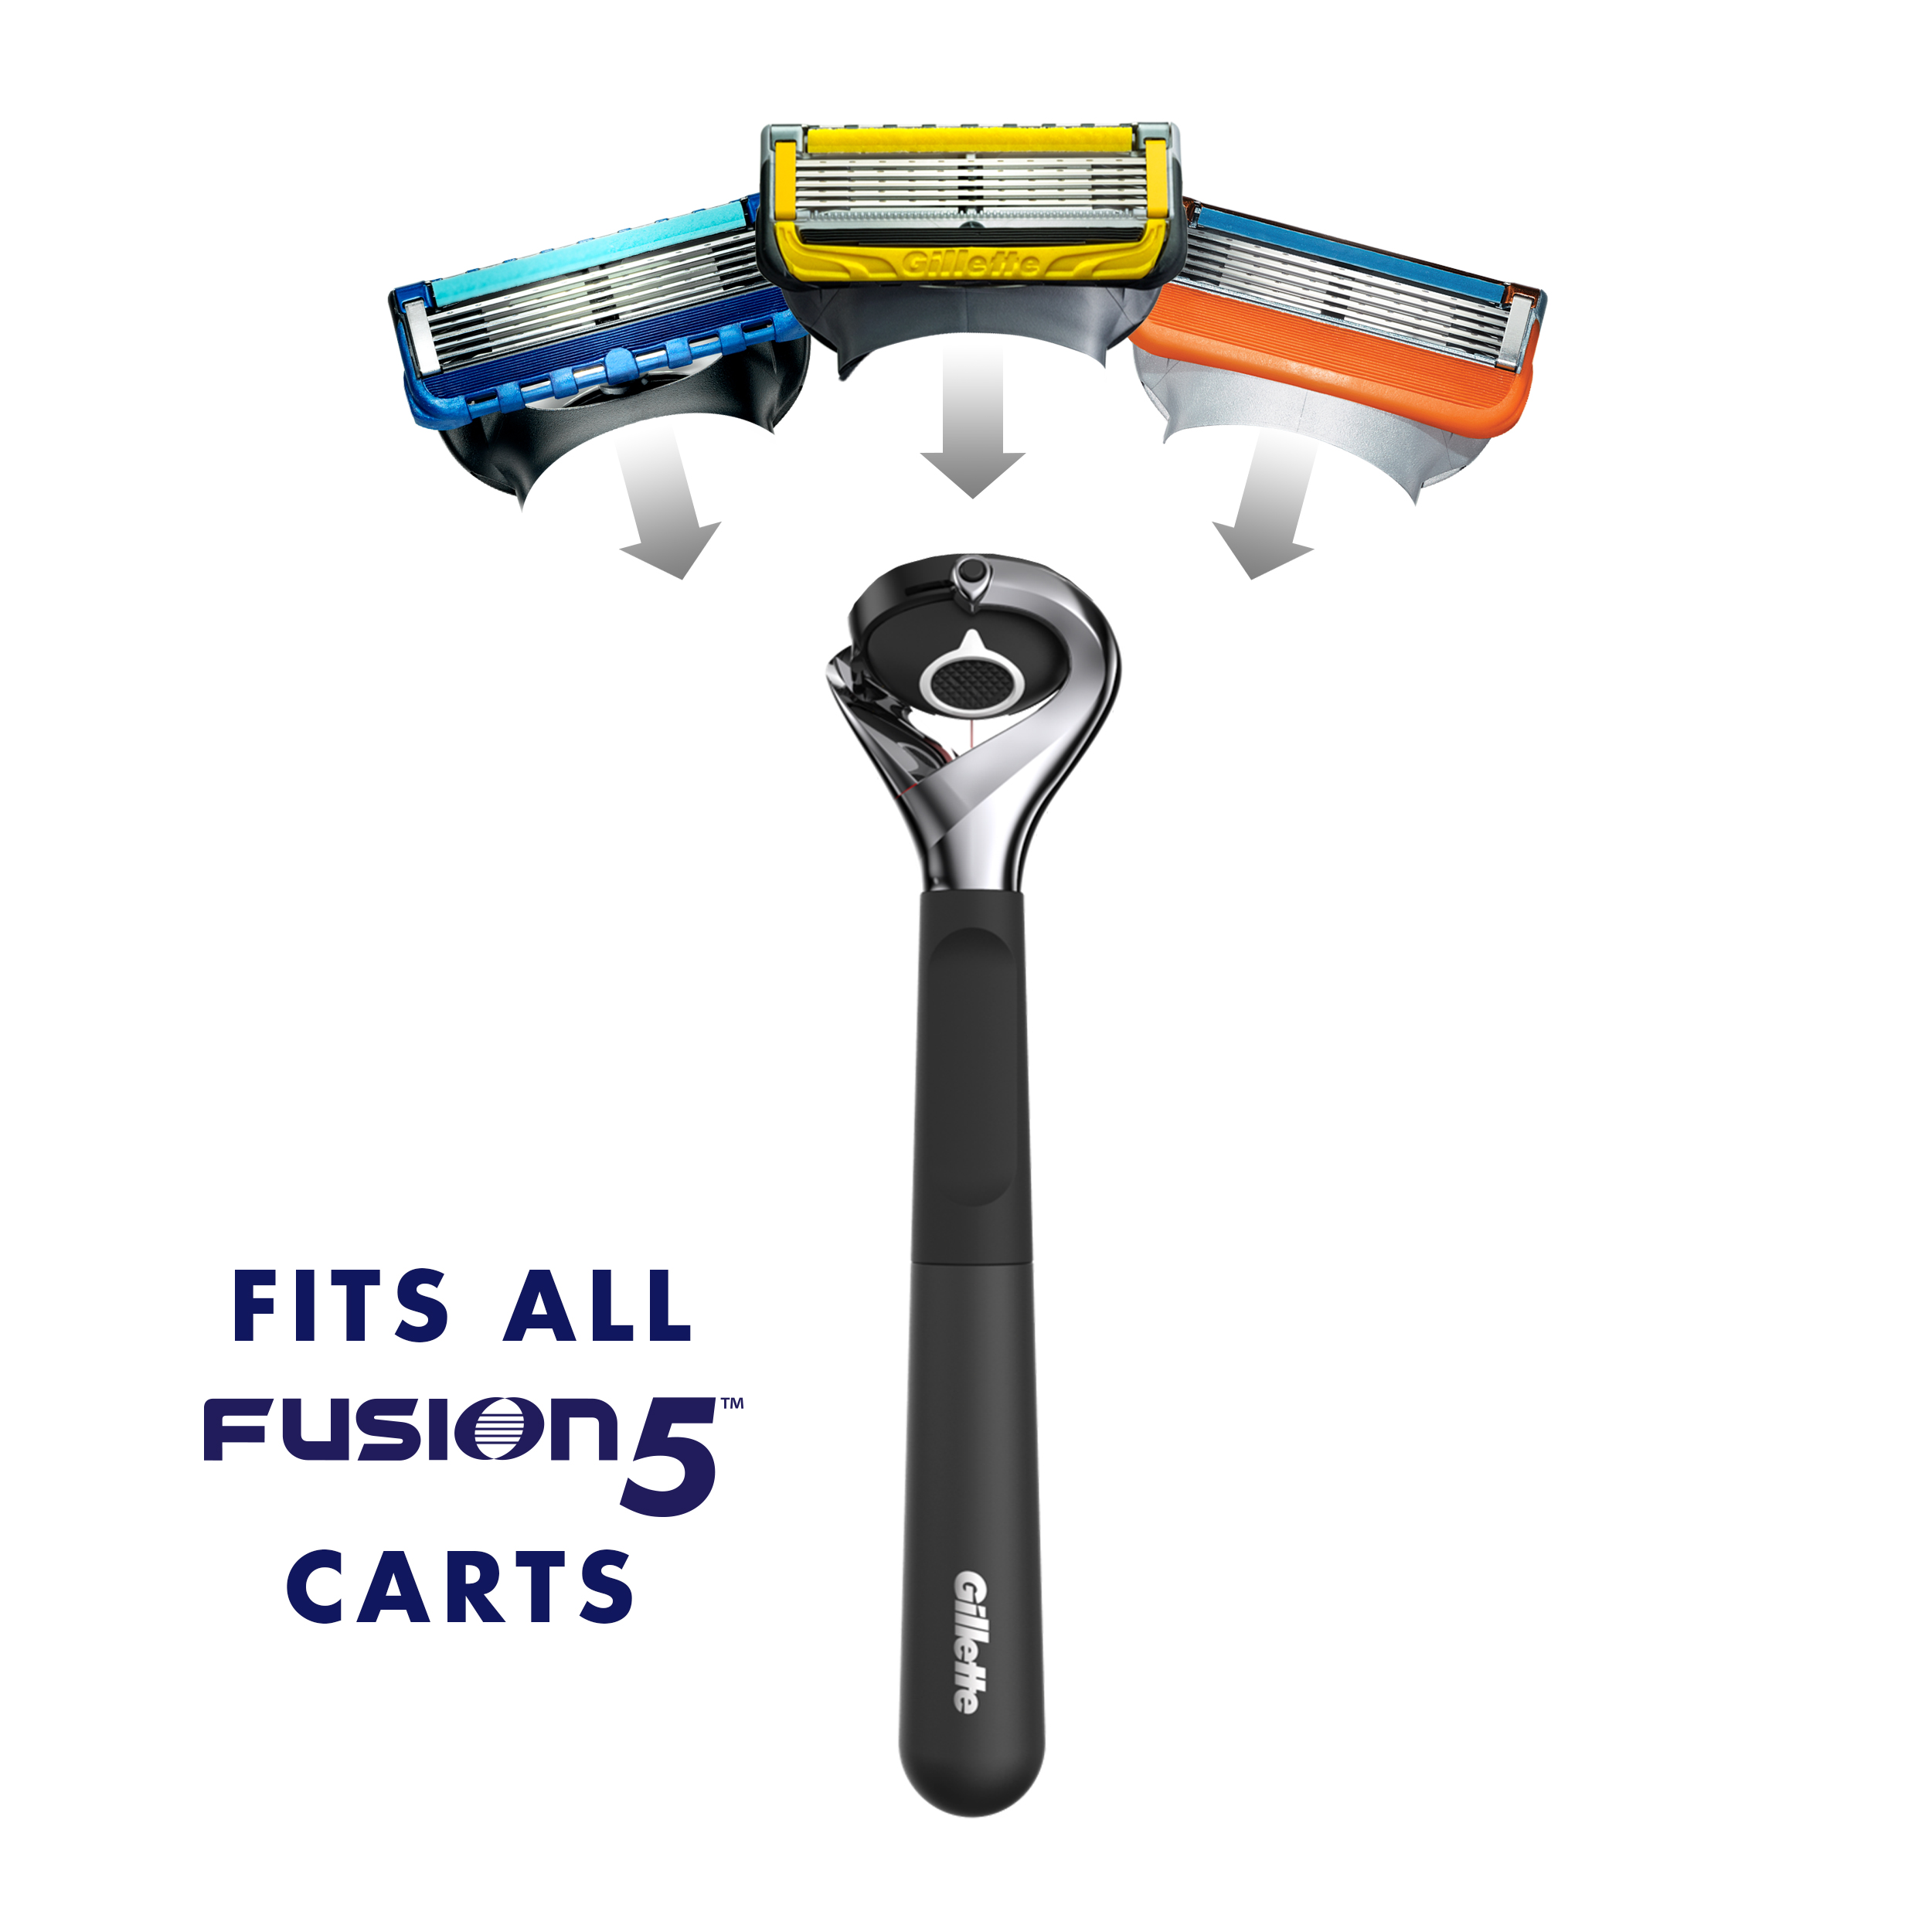 Gillette Limited Edition Fusion5 ProShield Razor Gift Pack - image 5 of 6